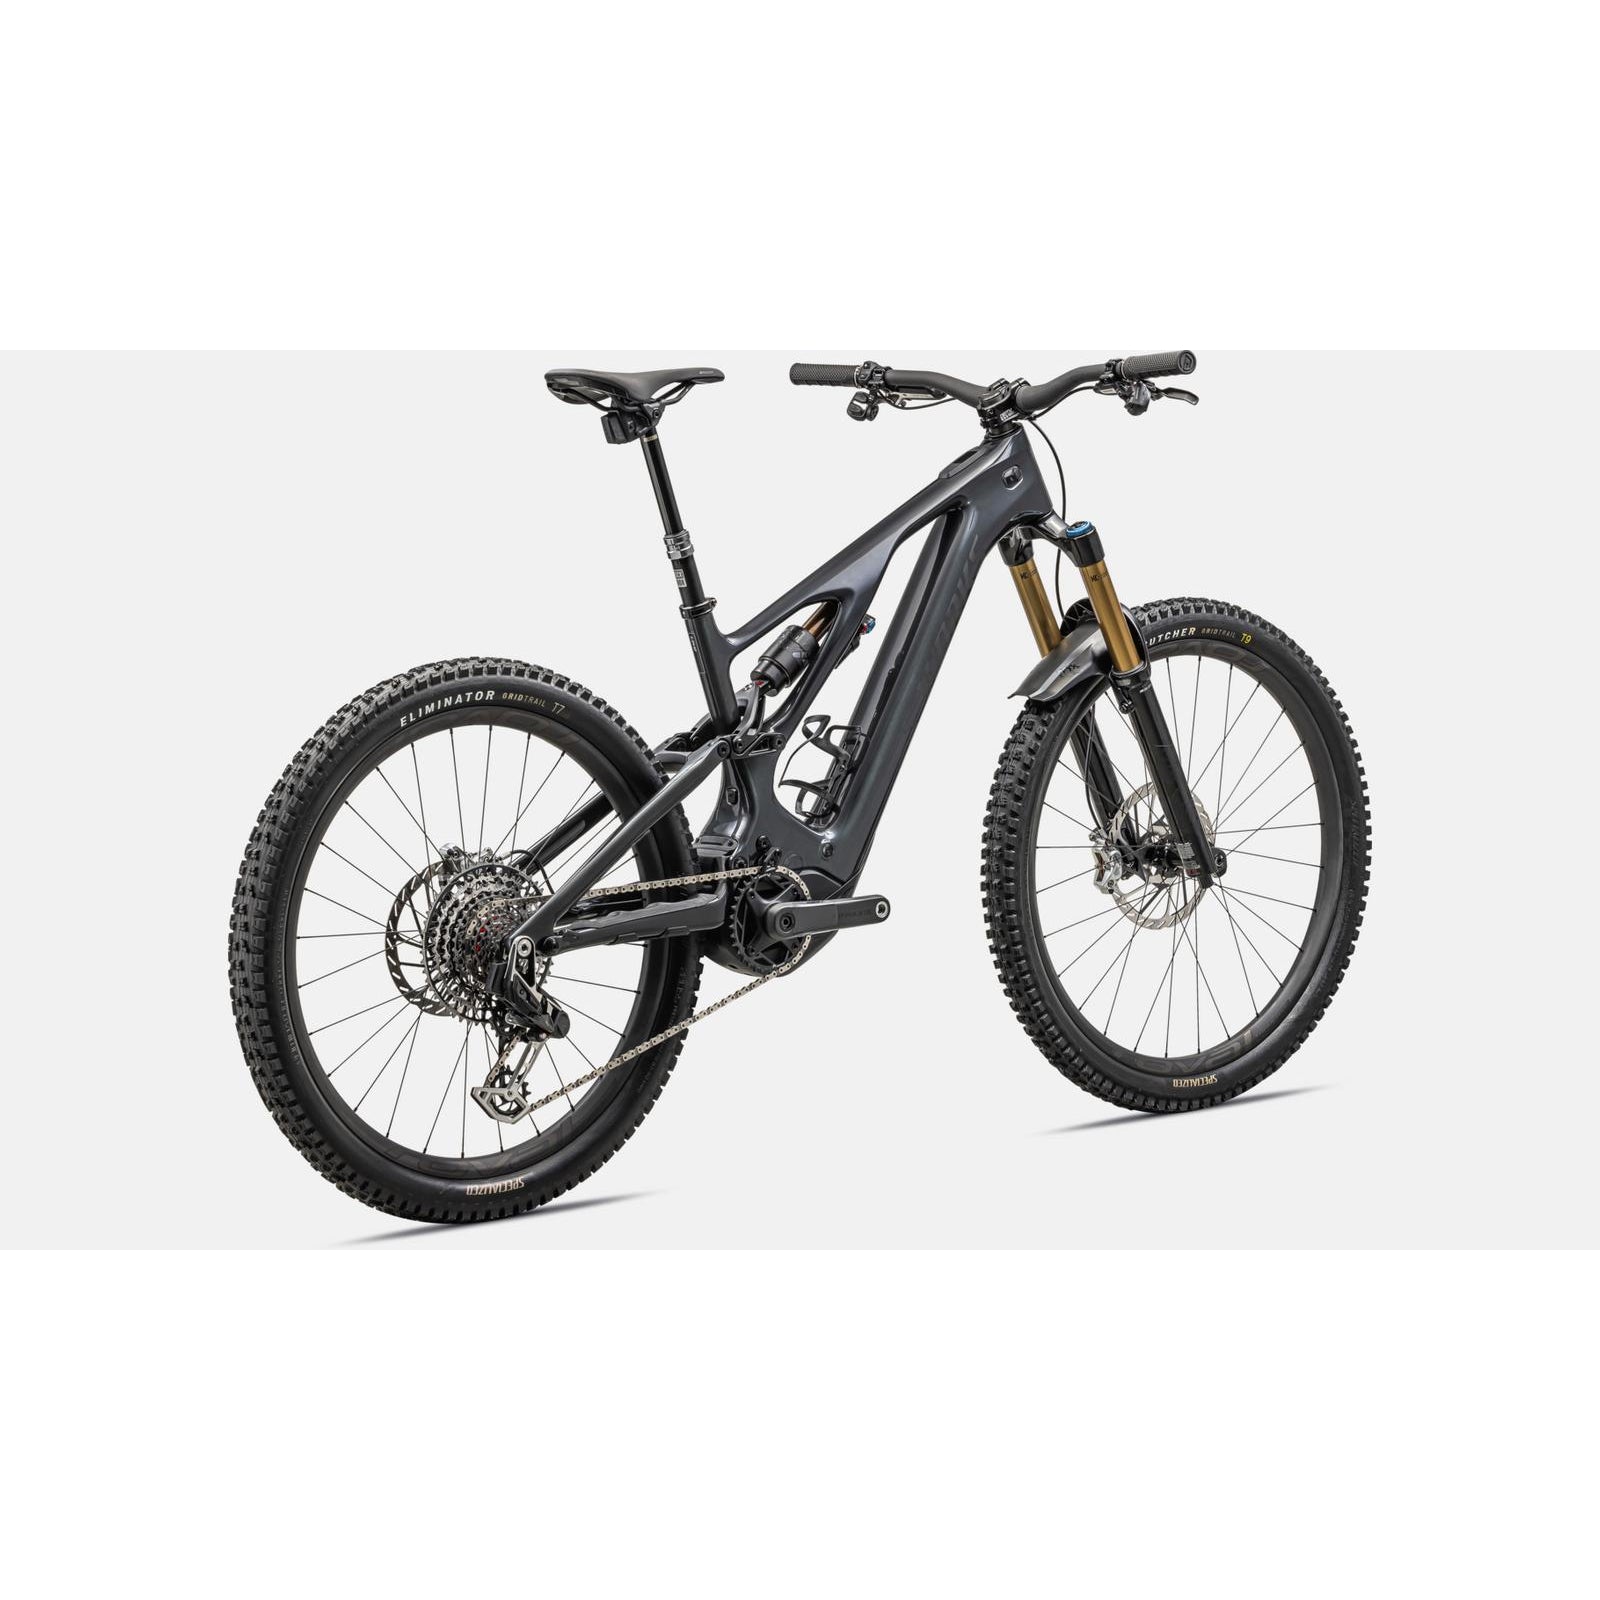 Specialized Levo S-Works Carbon G3 Electric Mountain Bike - Bikes - Bicycle Warehouse